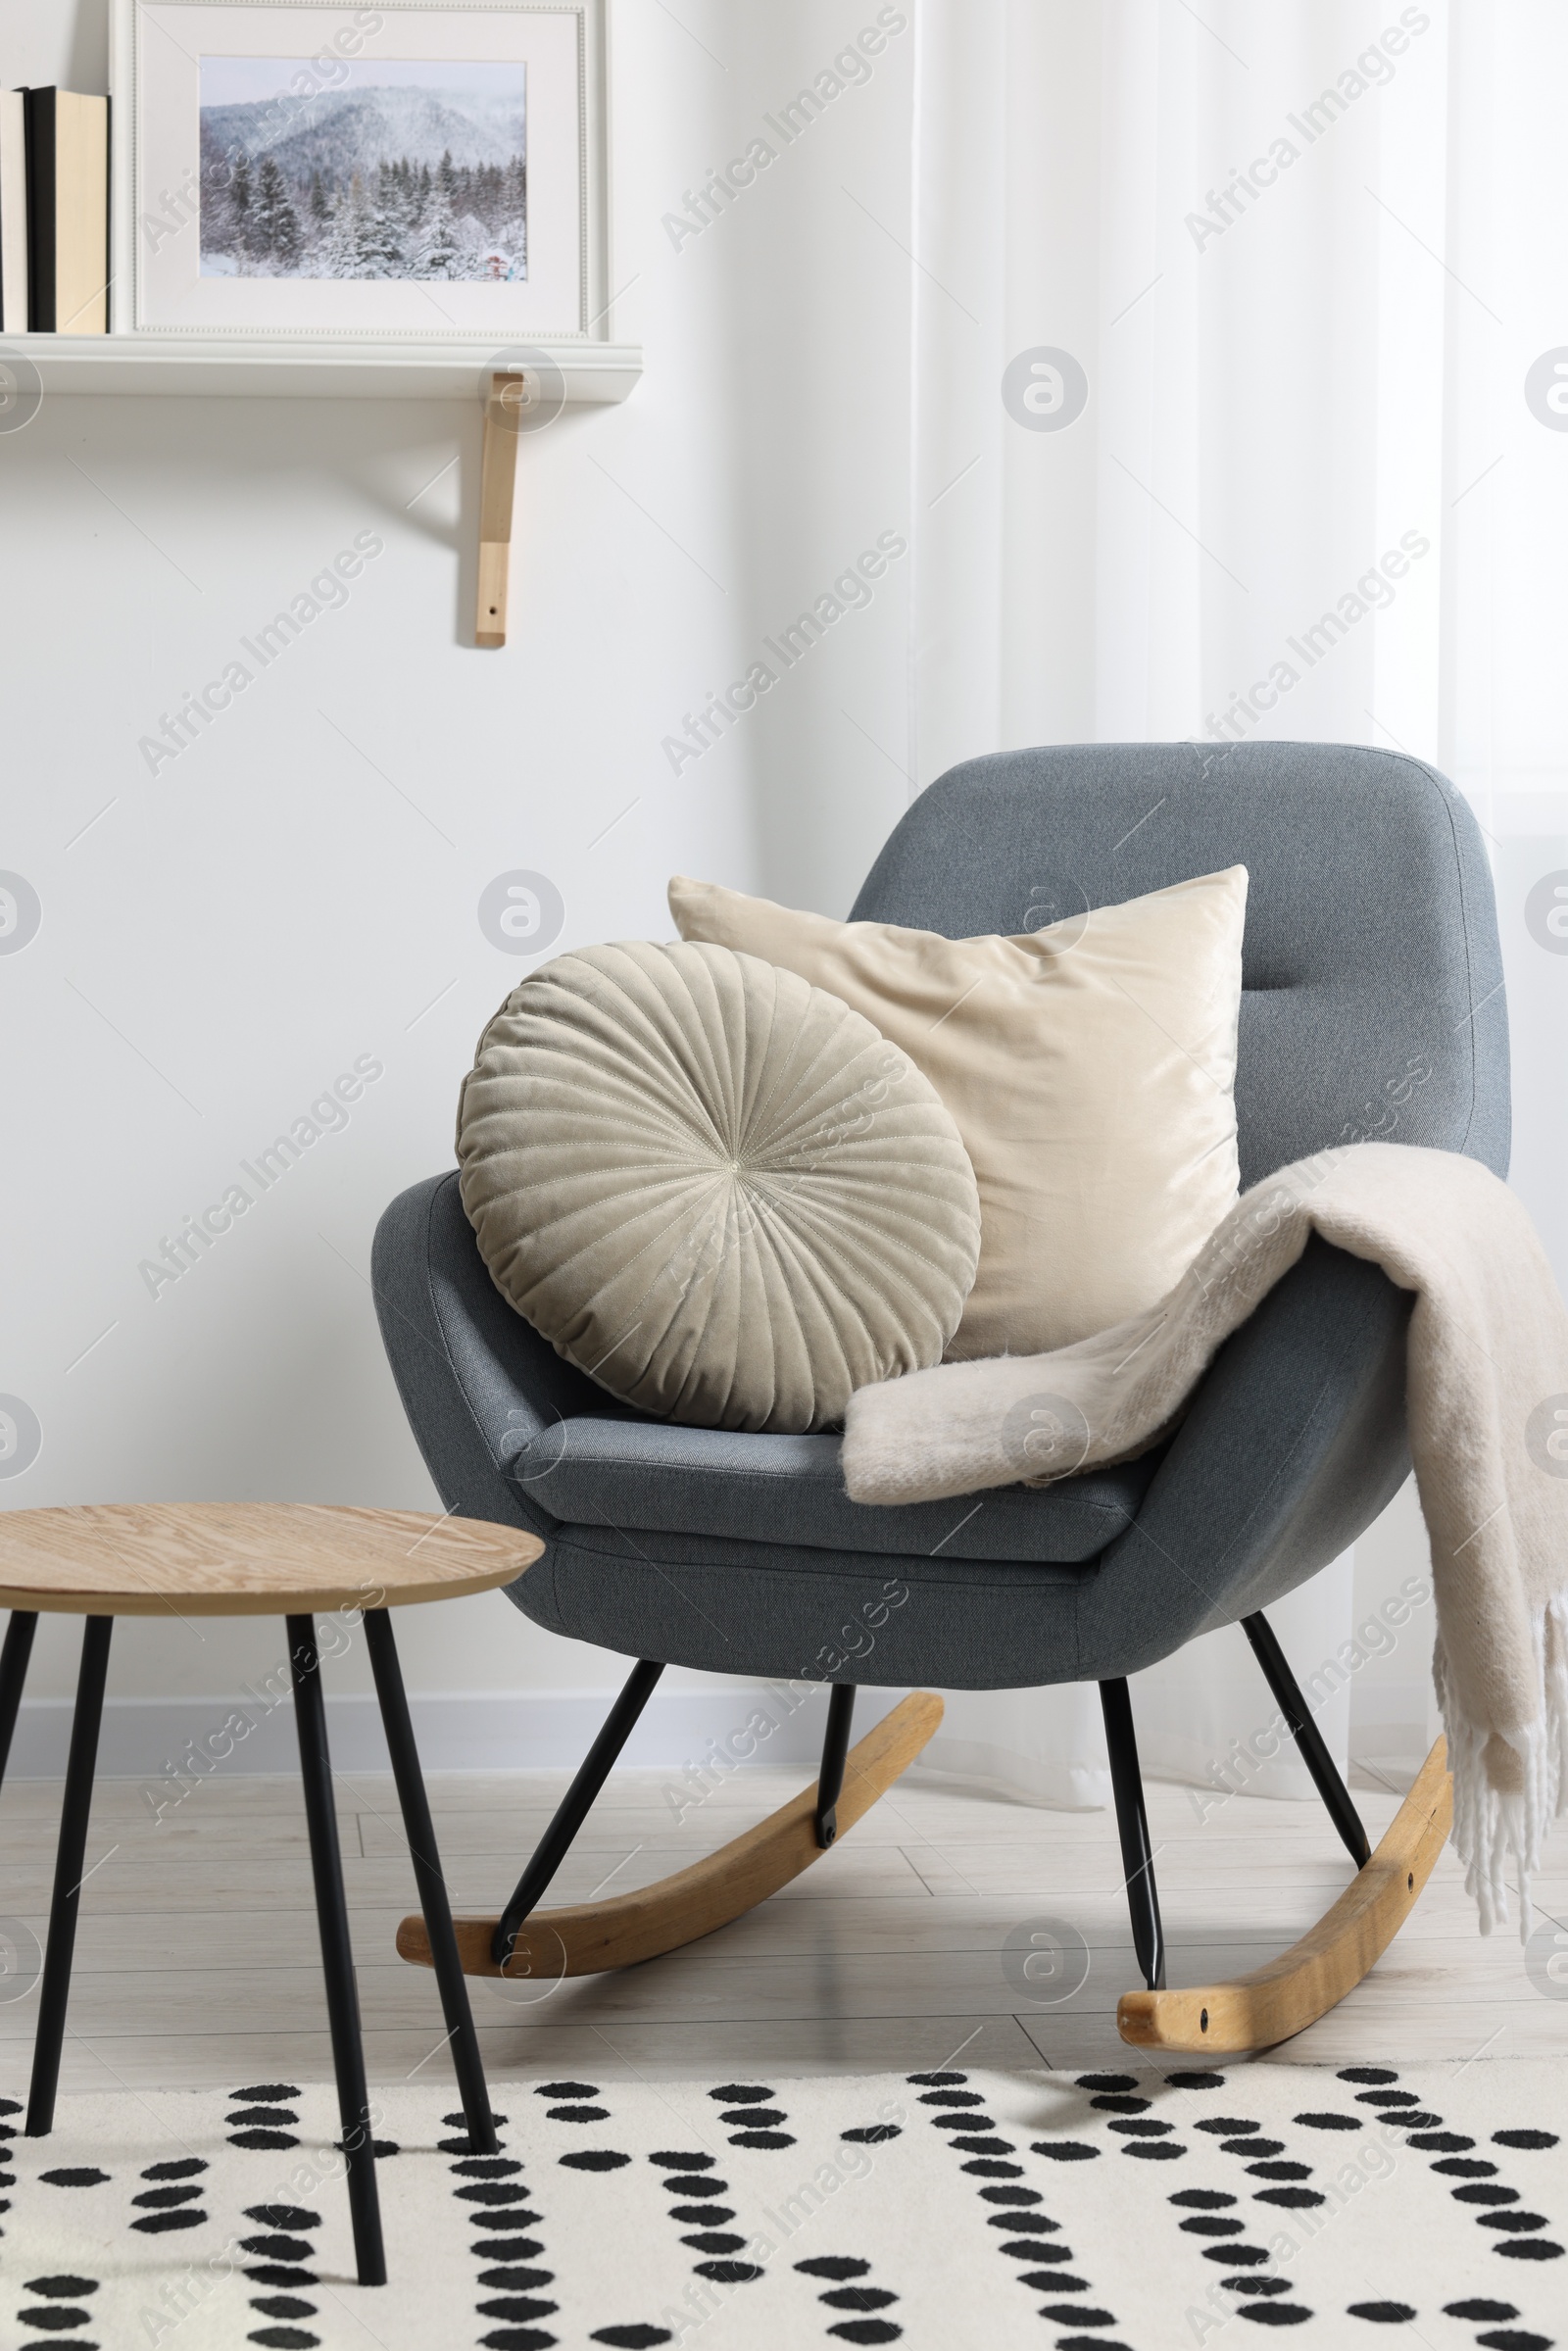 Photo of Soft pillows and blanket on rocking armchair indoors